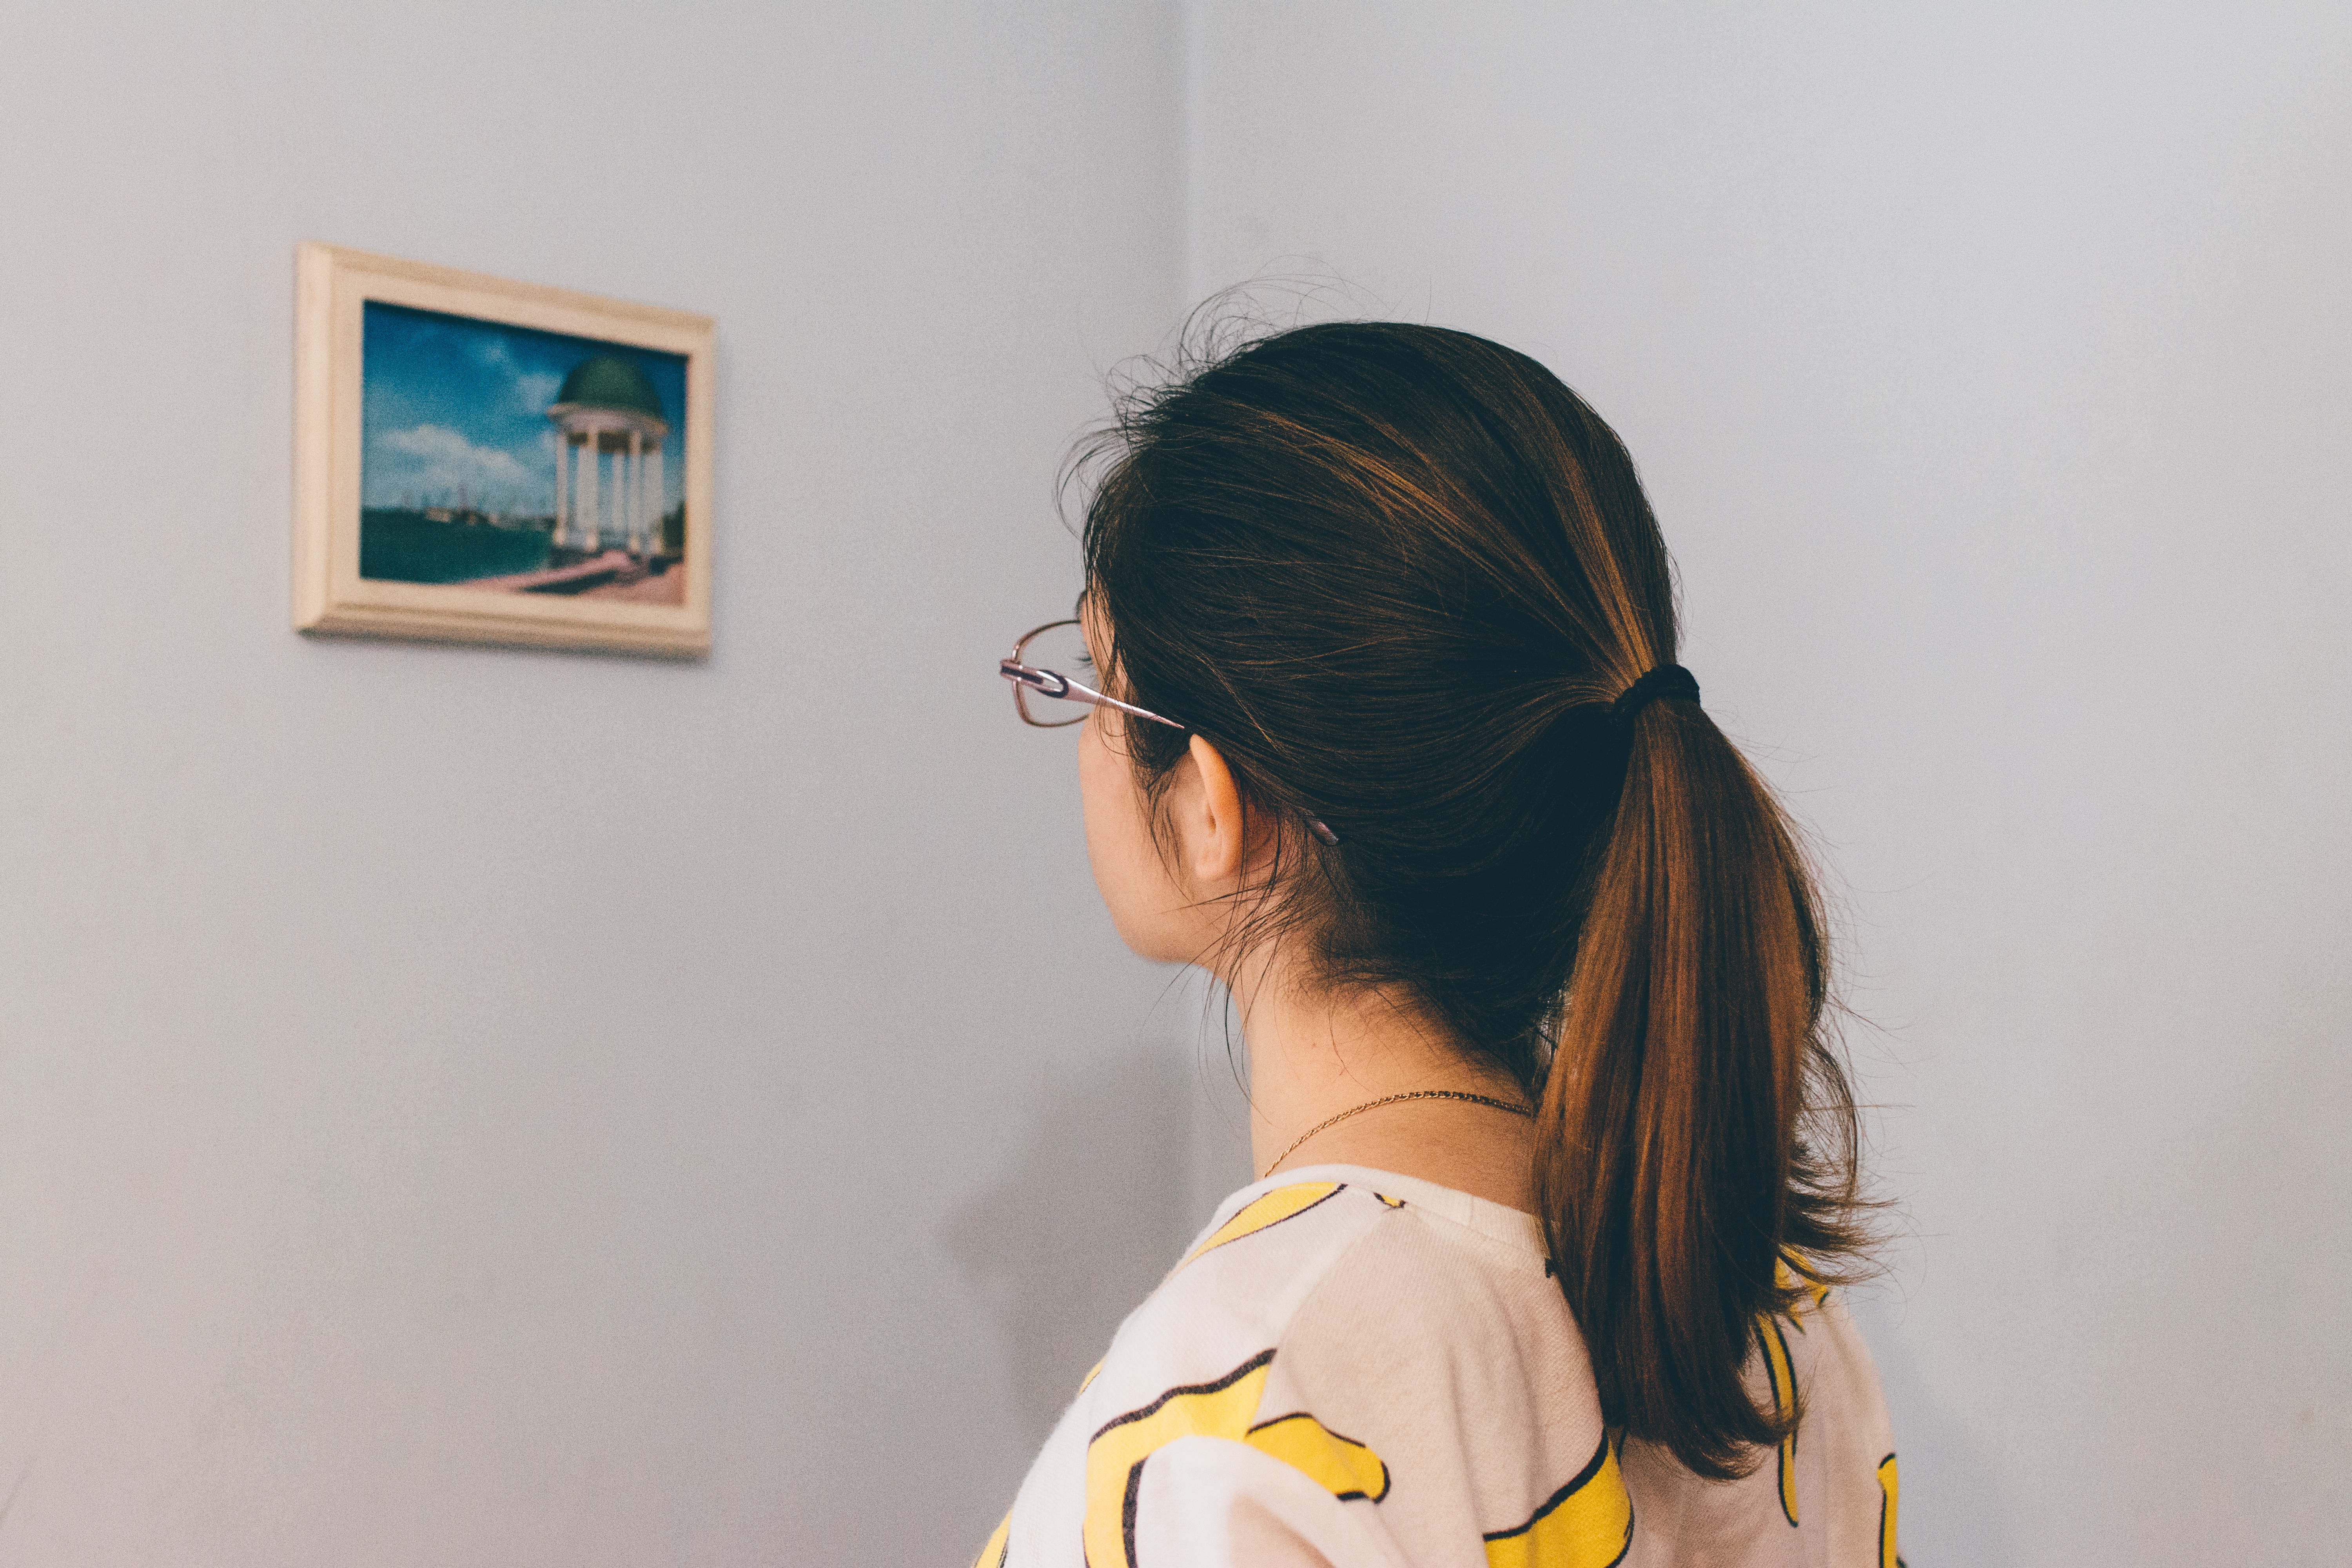 woman looking at blue and green photograph